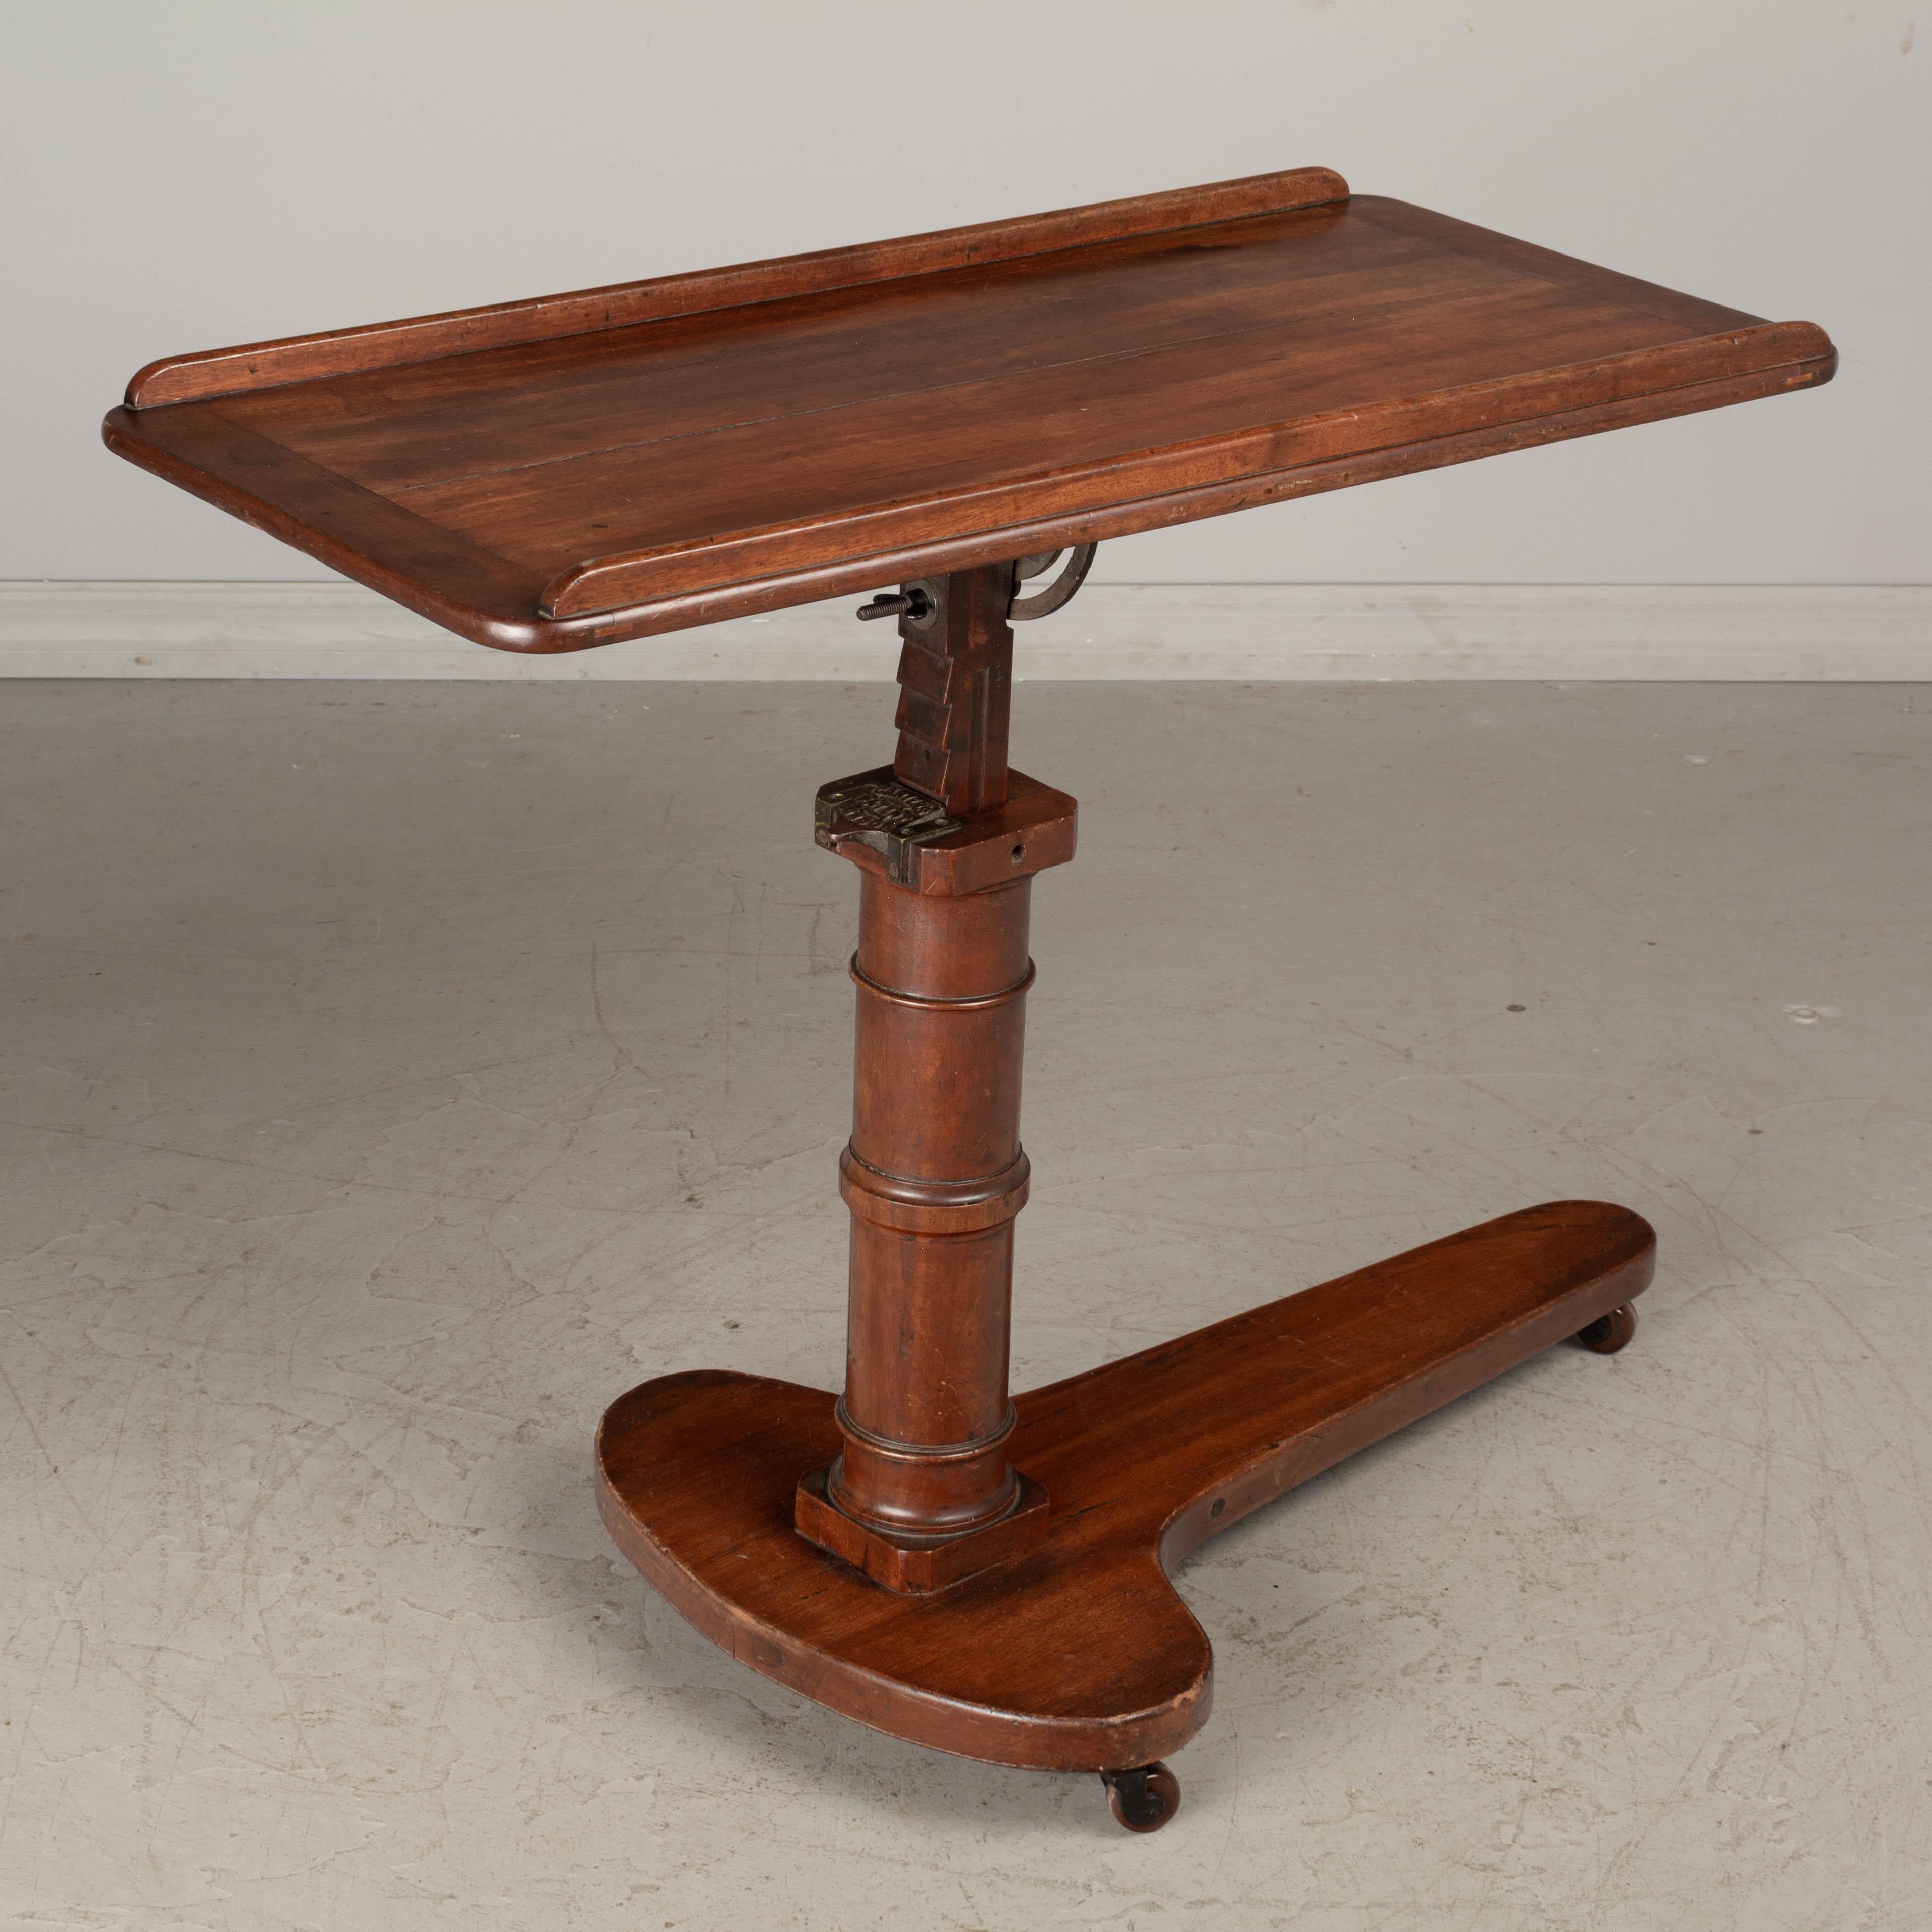 An early 20th century English mahogany adjustable tilt-top tray table, with cast iron mechanism. Tabletop may be tilted flat or angled and has a ledge on each side. Iron latch stamped: Carter's at London. The height adjusts from 21” to 42”. Base has